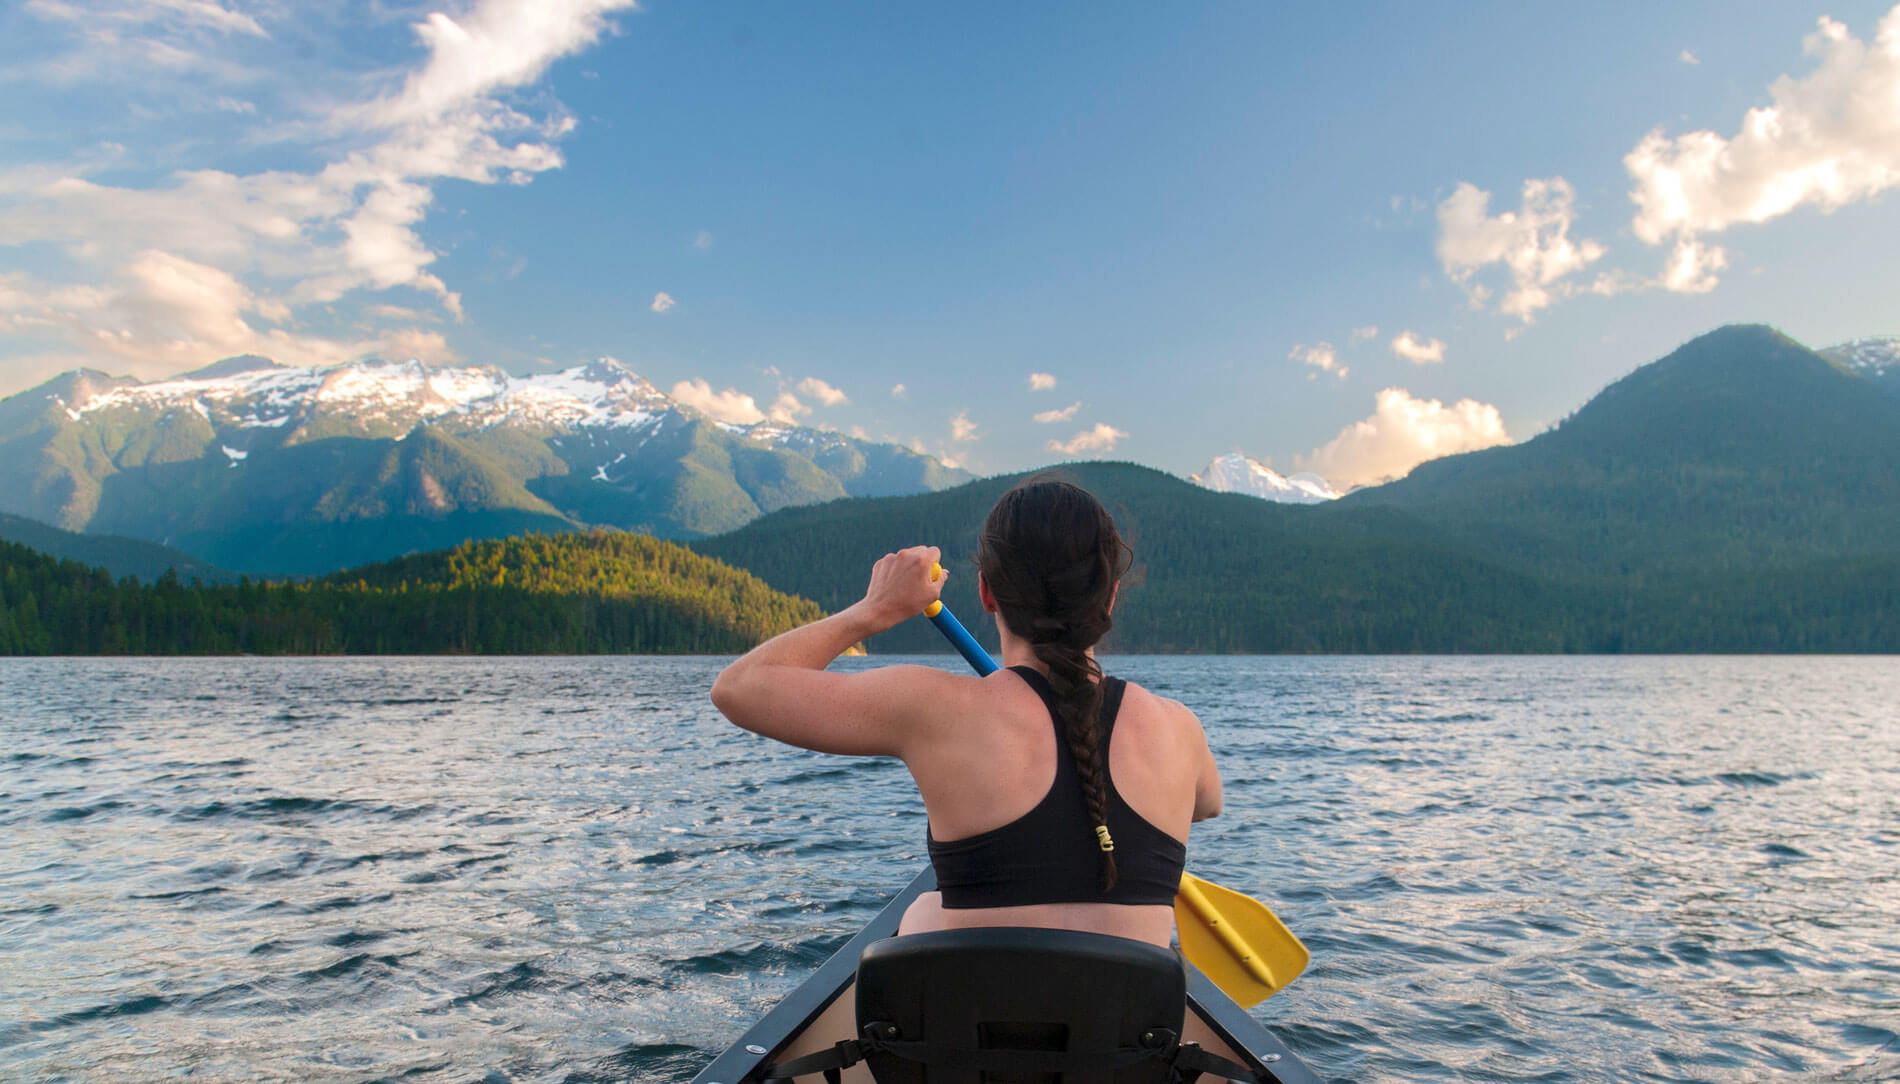 A woman canoes on Ross Lake in Washington